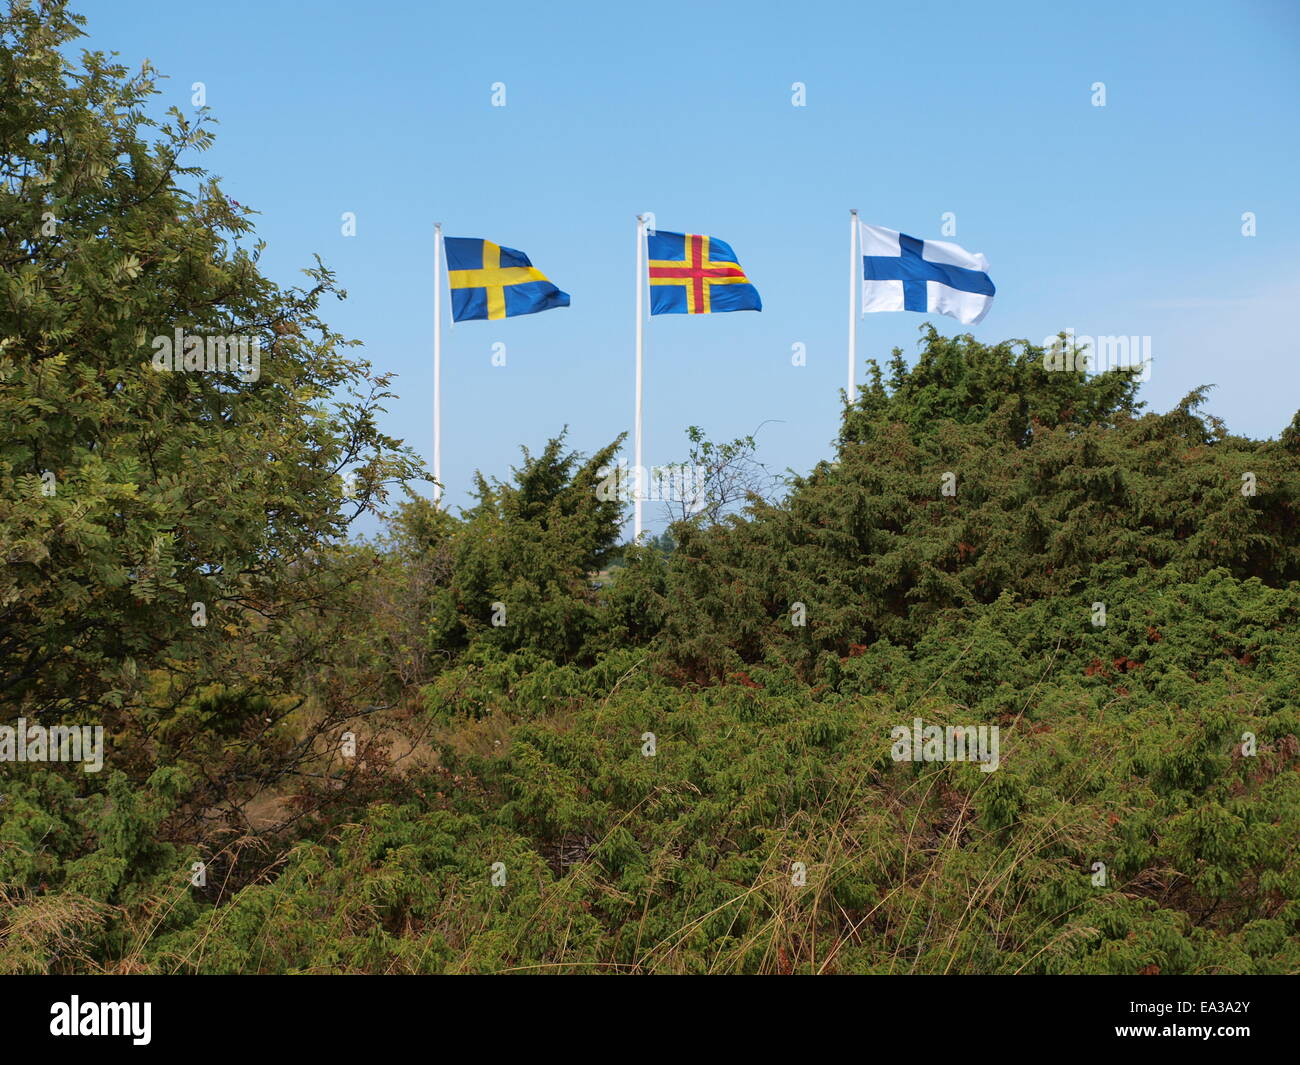 Flags Of Sweden Aland Finland Stock Photo Alamy